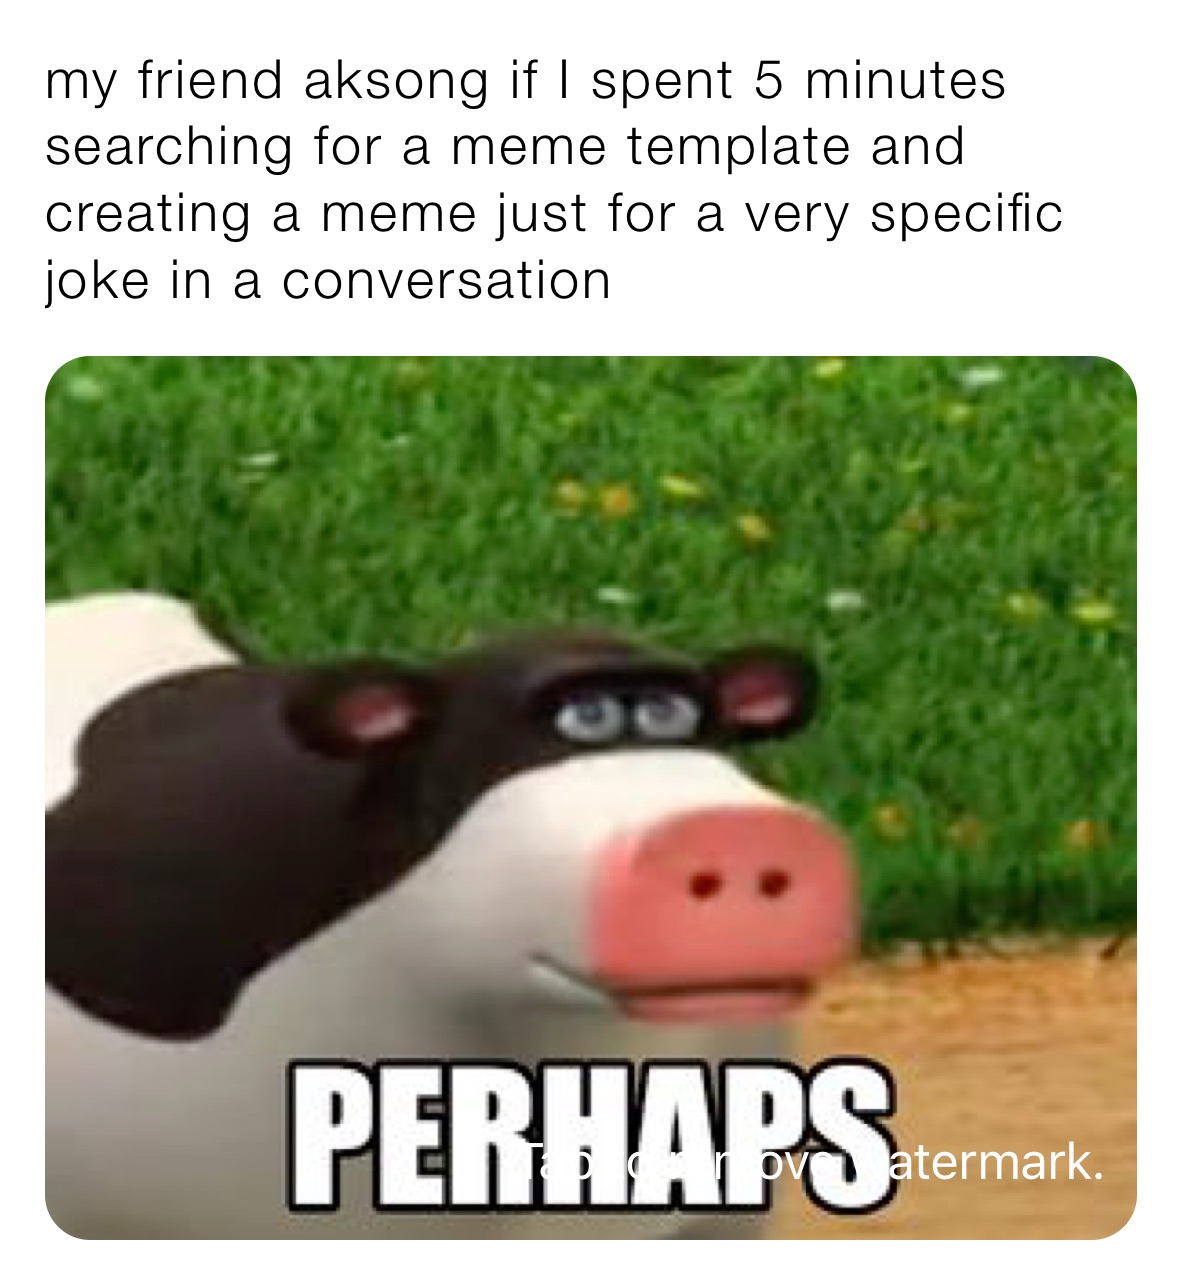 my friend aksong if I spent 5 minutes searching for a meme template and creating a meme just for a very specific joke in a conversation 